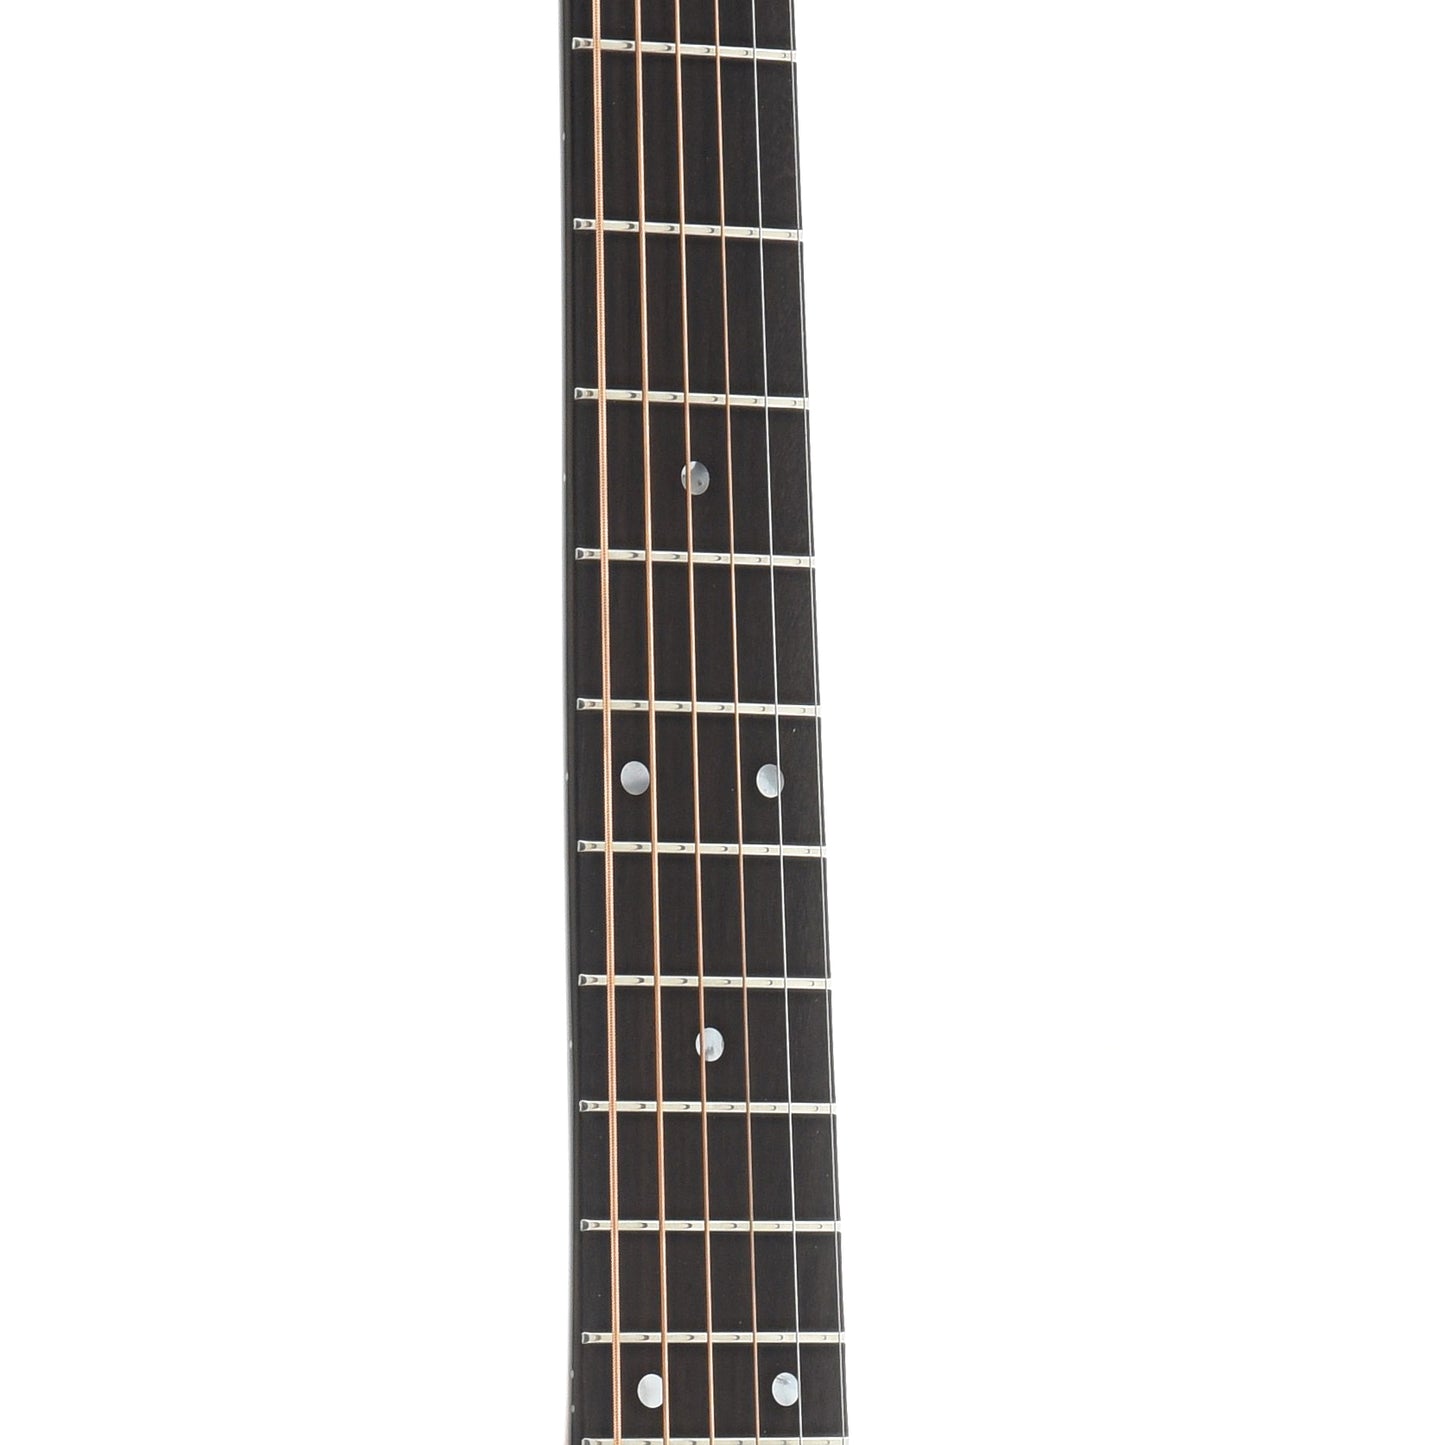 Fretboard of Recording King RO-328 000 Acoustic Guitar 